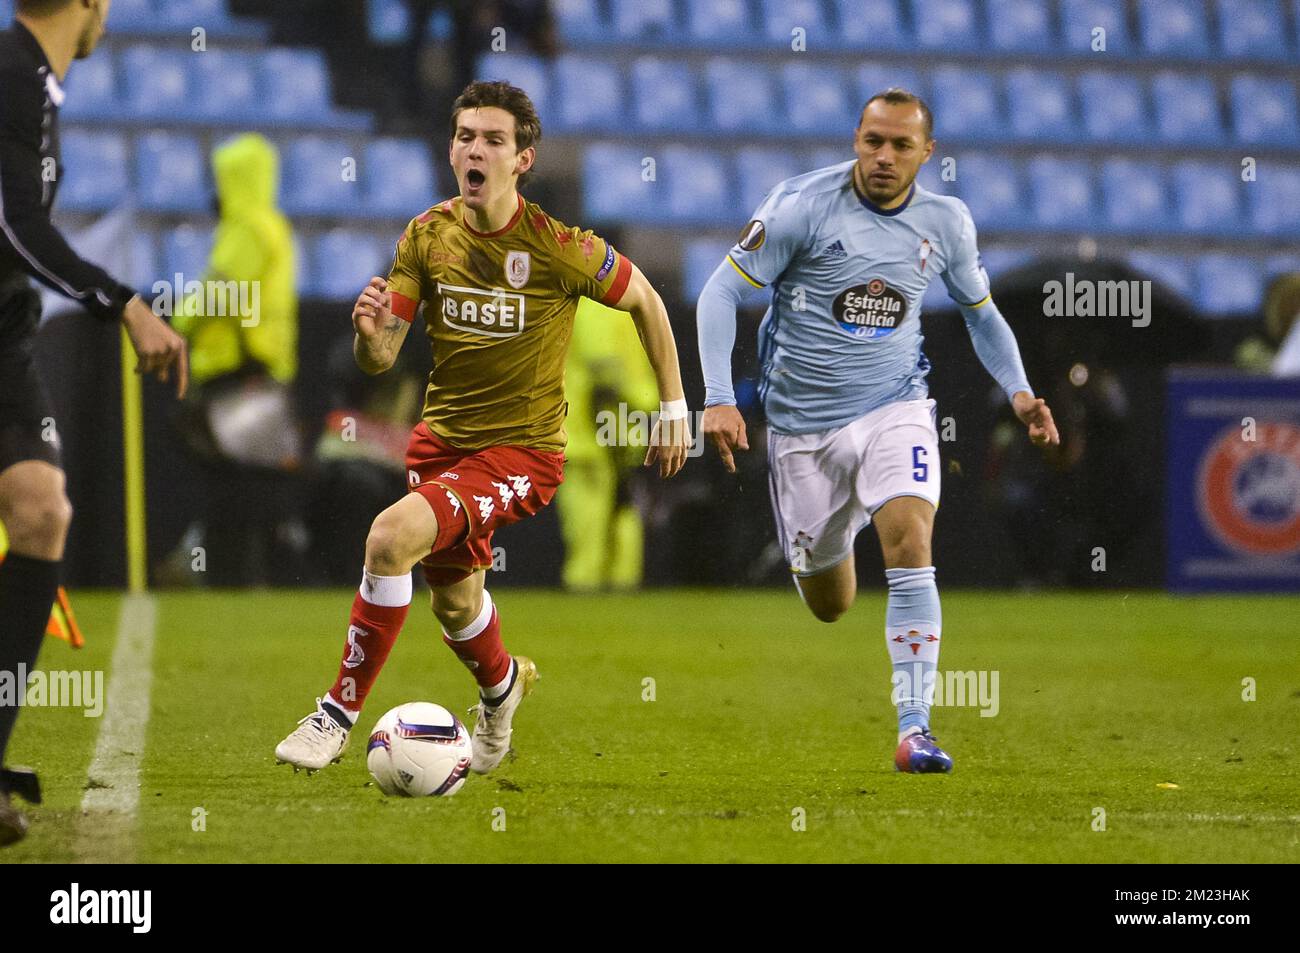 Standard's Benito Raman and Celta's Marcelo Diaz pictured during a game of the fifth day of the group stage (Group G) of the Europa League competition between Spanish team Celta Vigo and Belgian club Standard de Liege, Thursday 24 November 2016, in Vigo, Spain. BELGA PHOTO NICOLAS LAMBERT Stock Photo